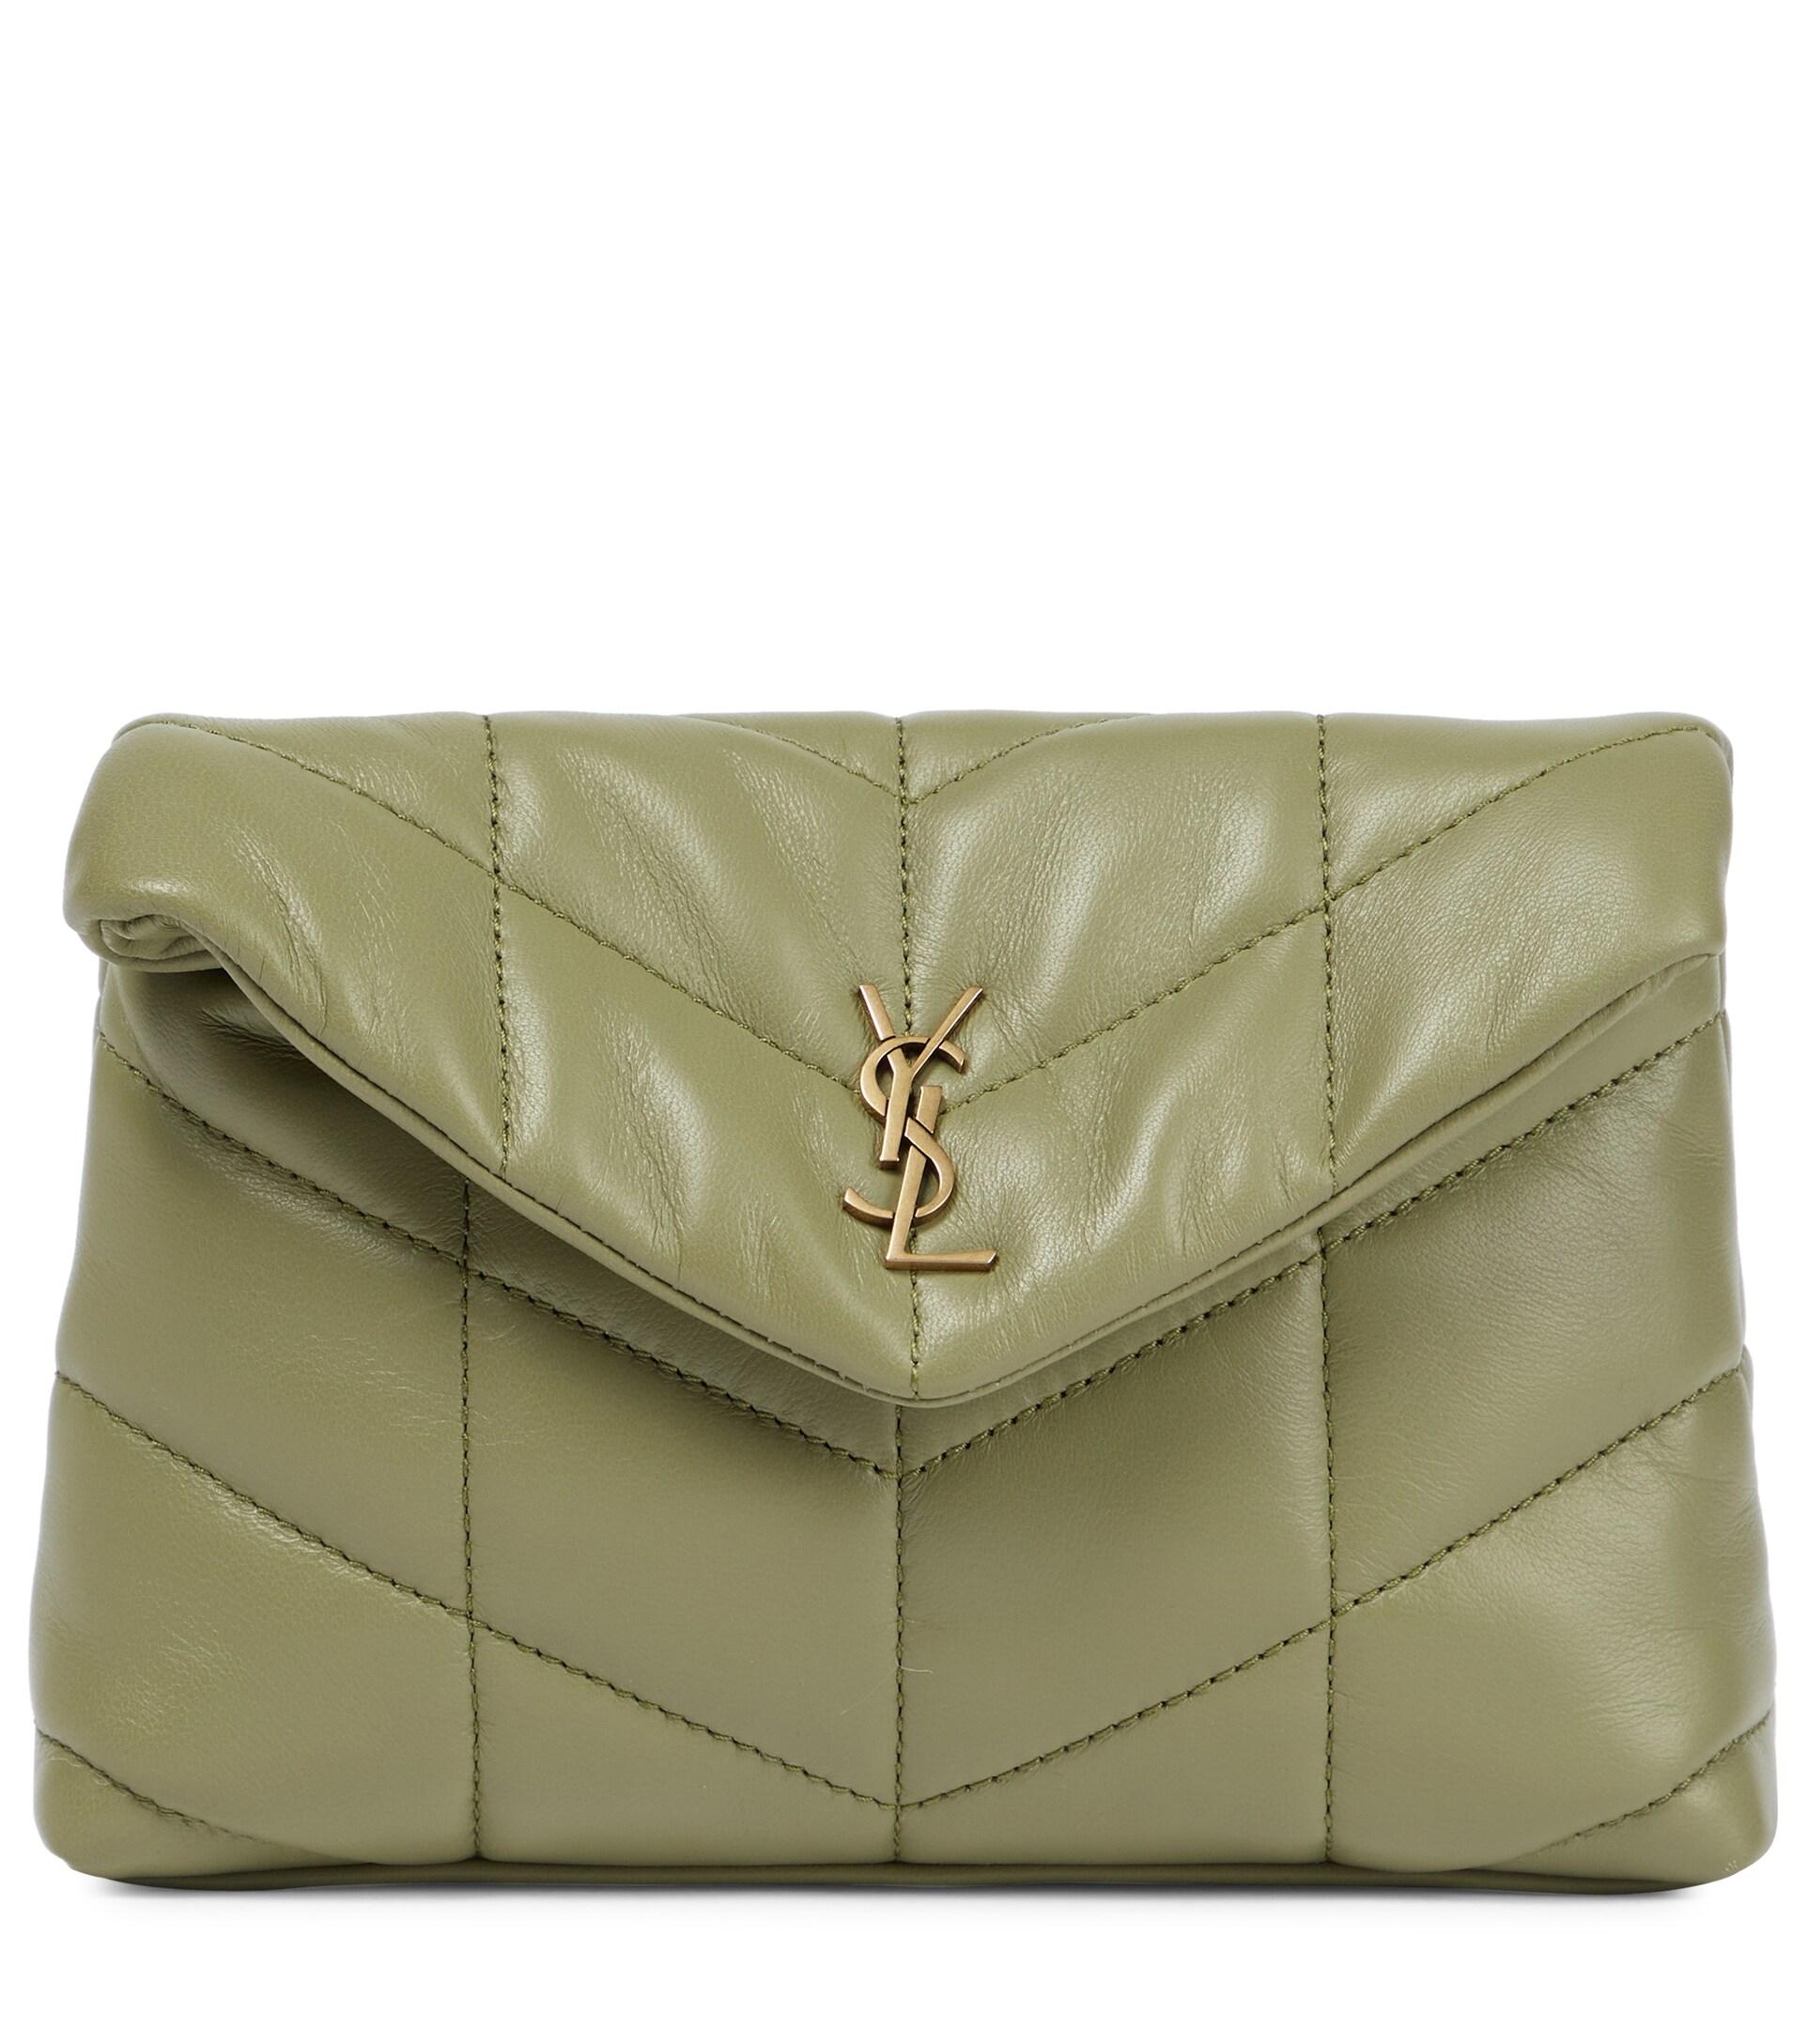 Saint Laurent Puffer Small Leather Clutch in Green | Lyst